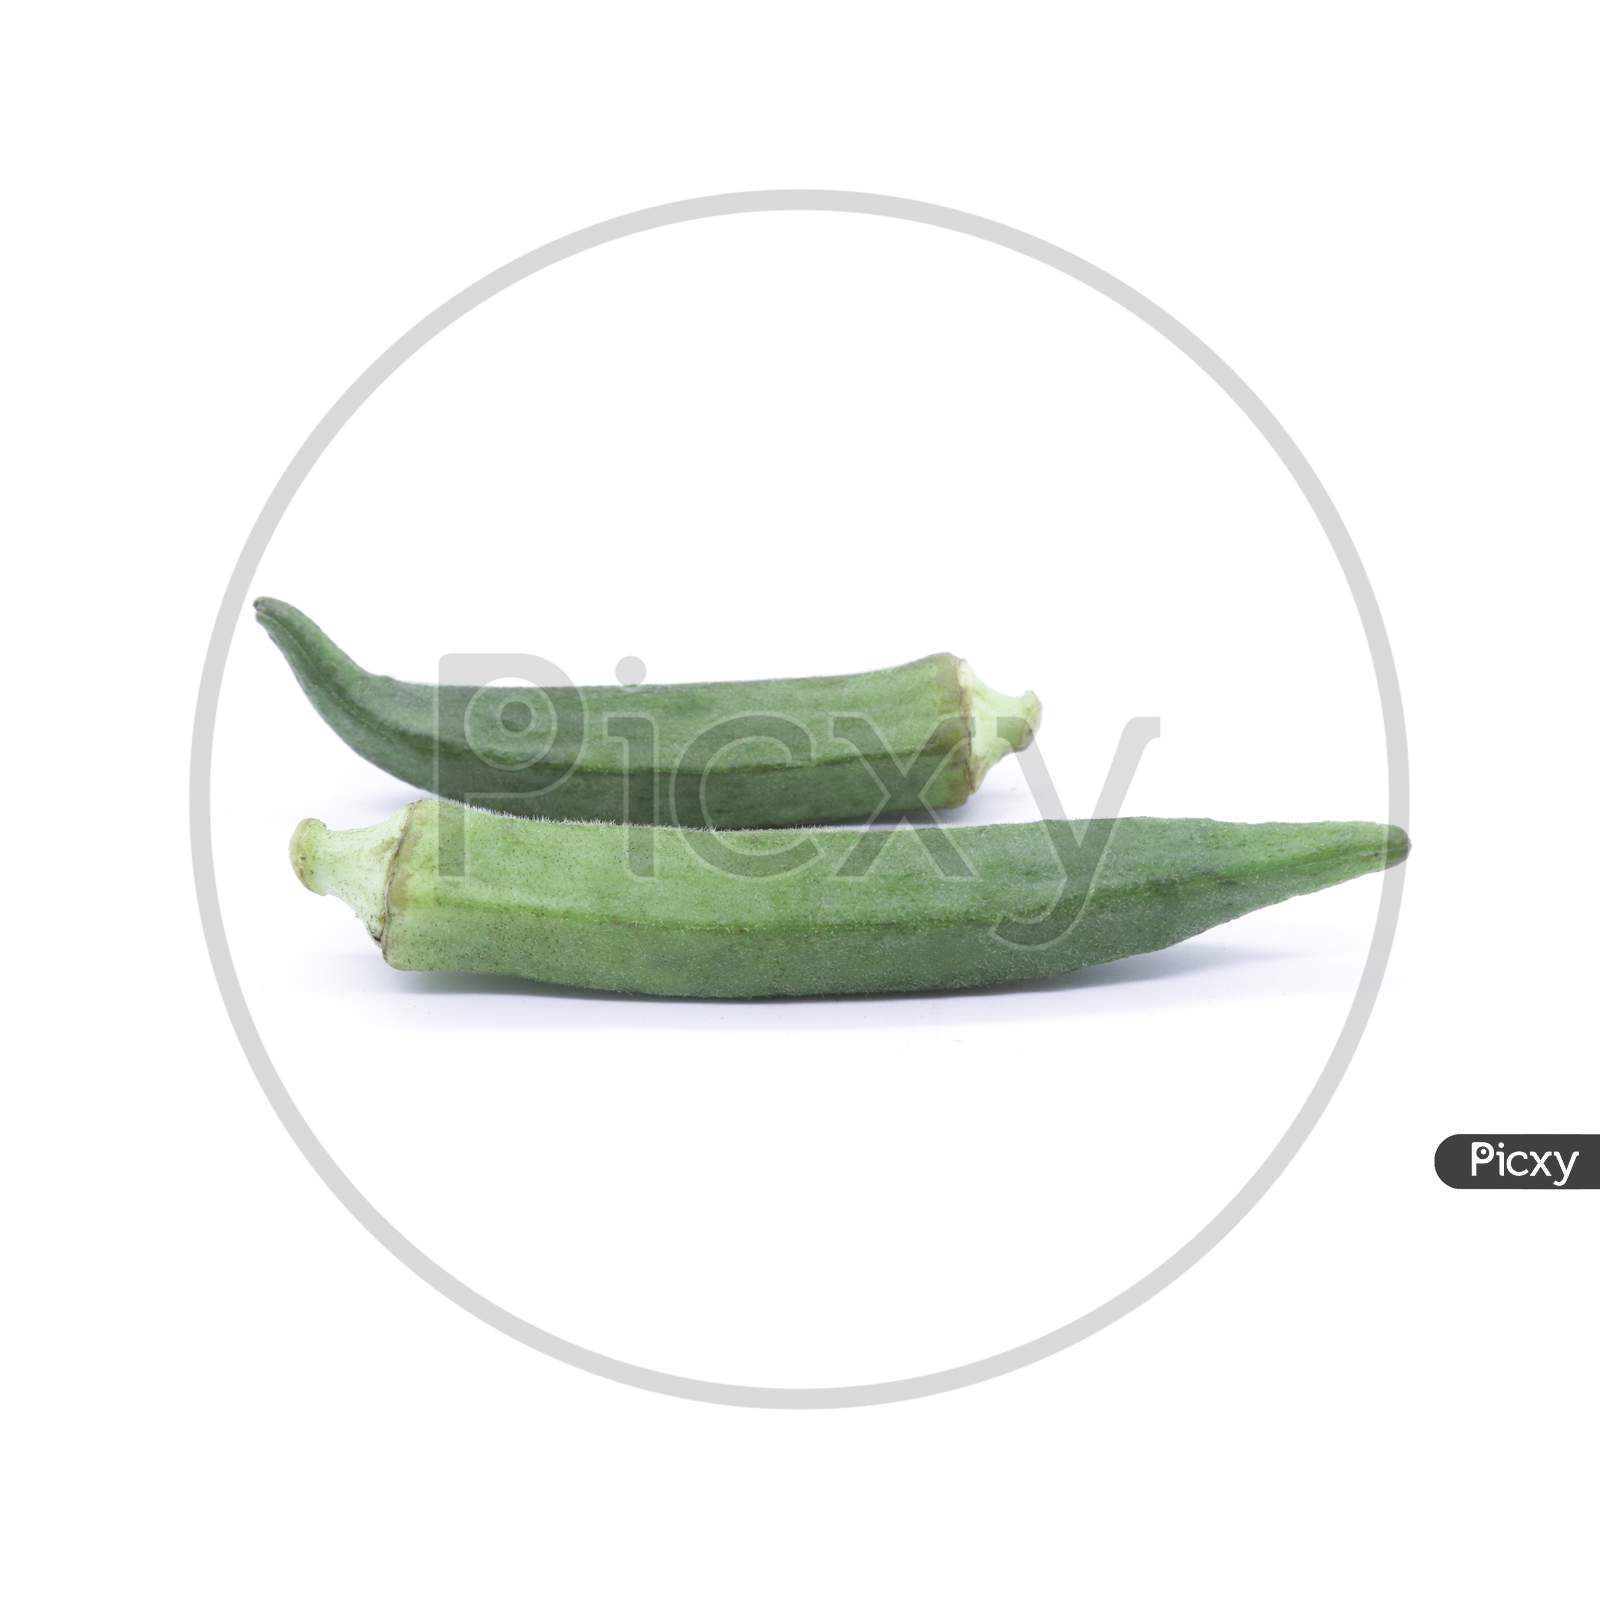 An organic and Fresh Bhindi - healthy okra or lady's finger on white background